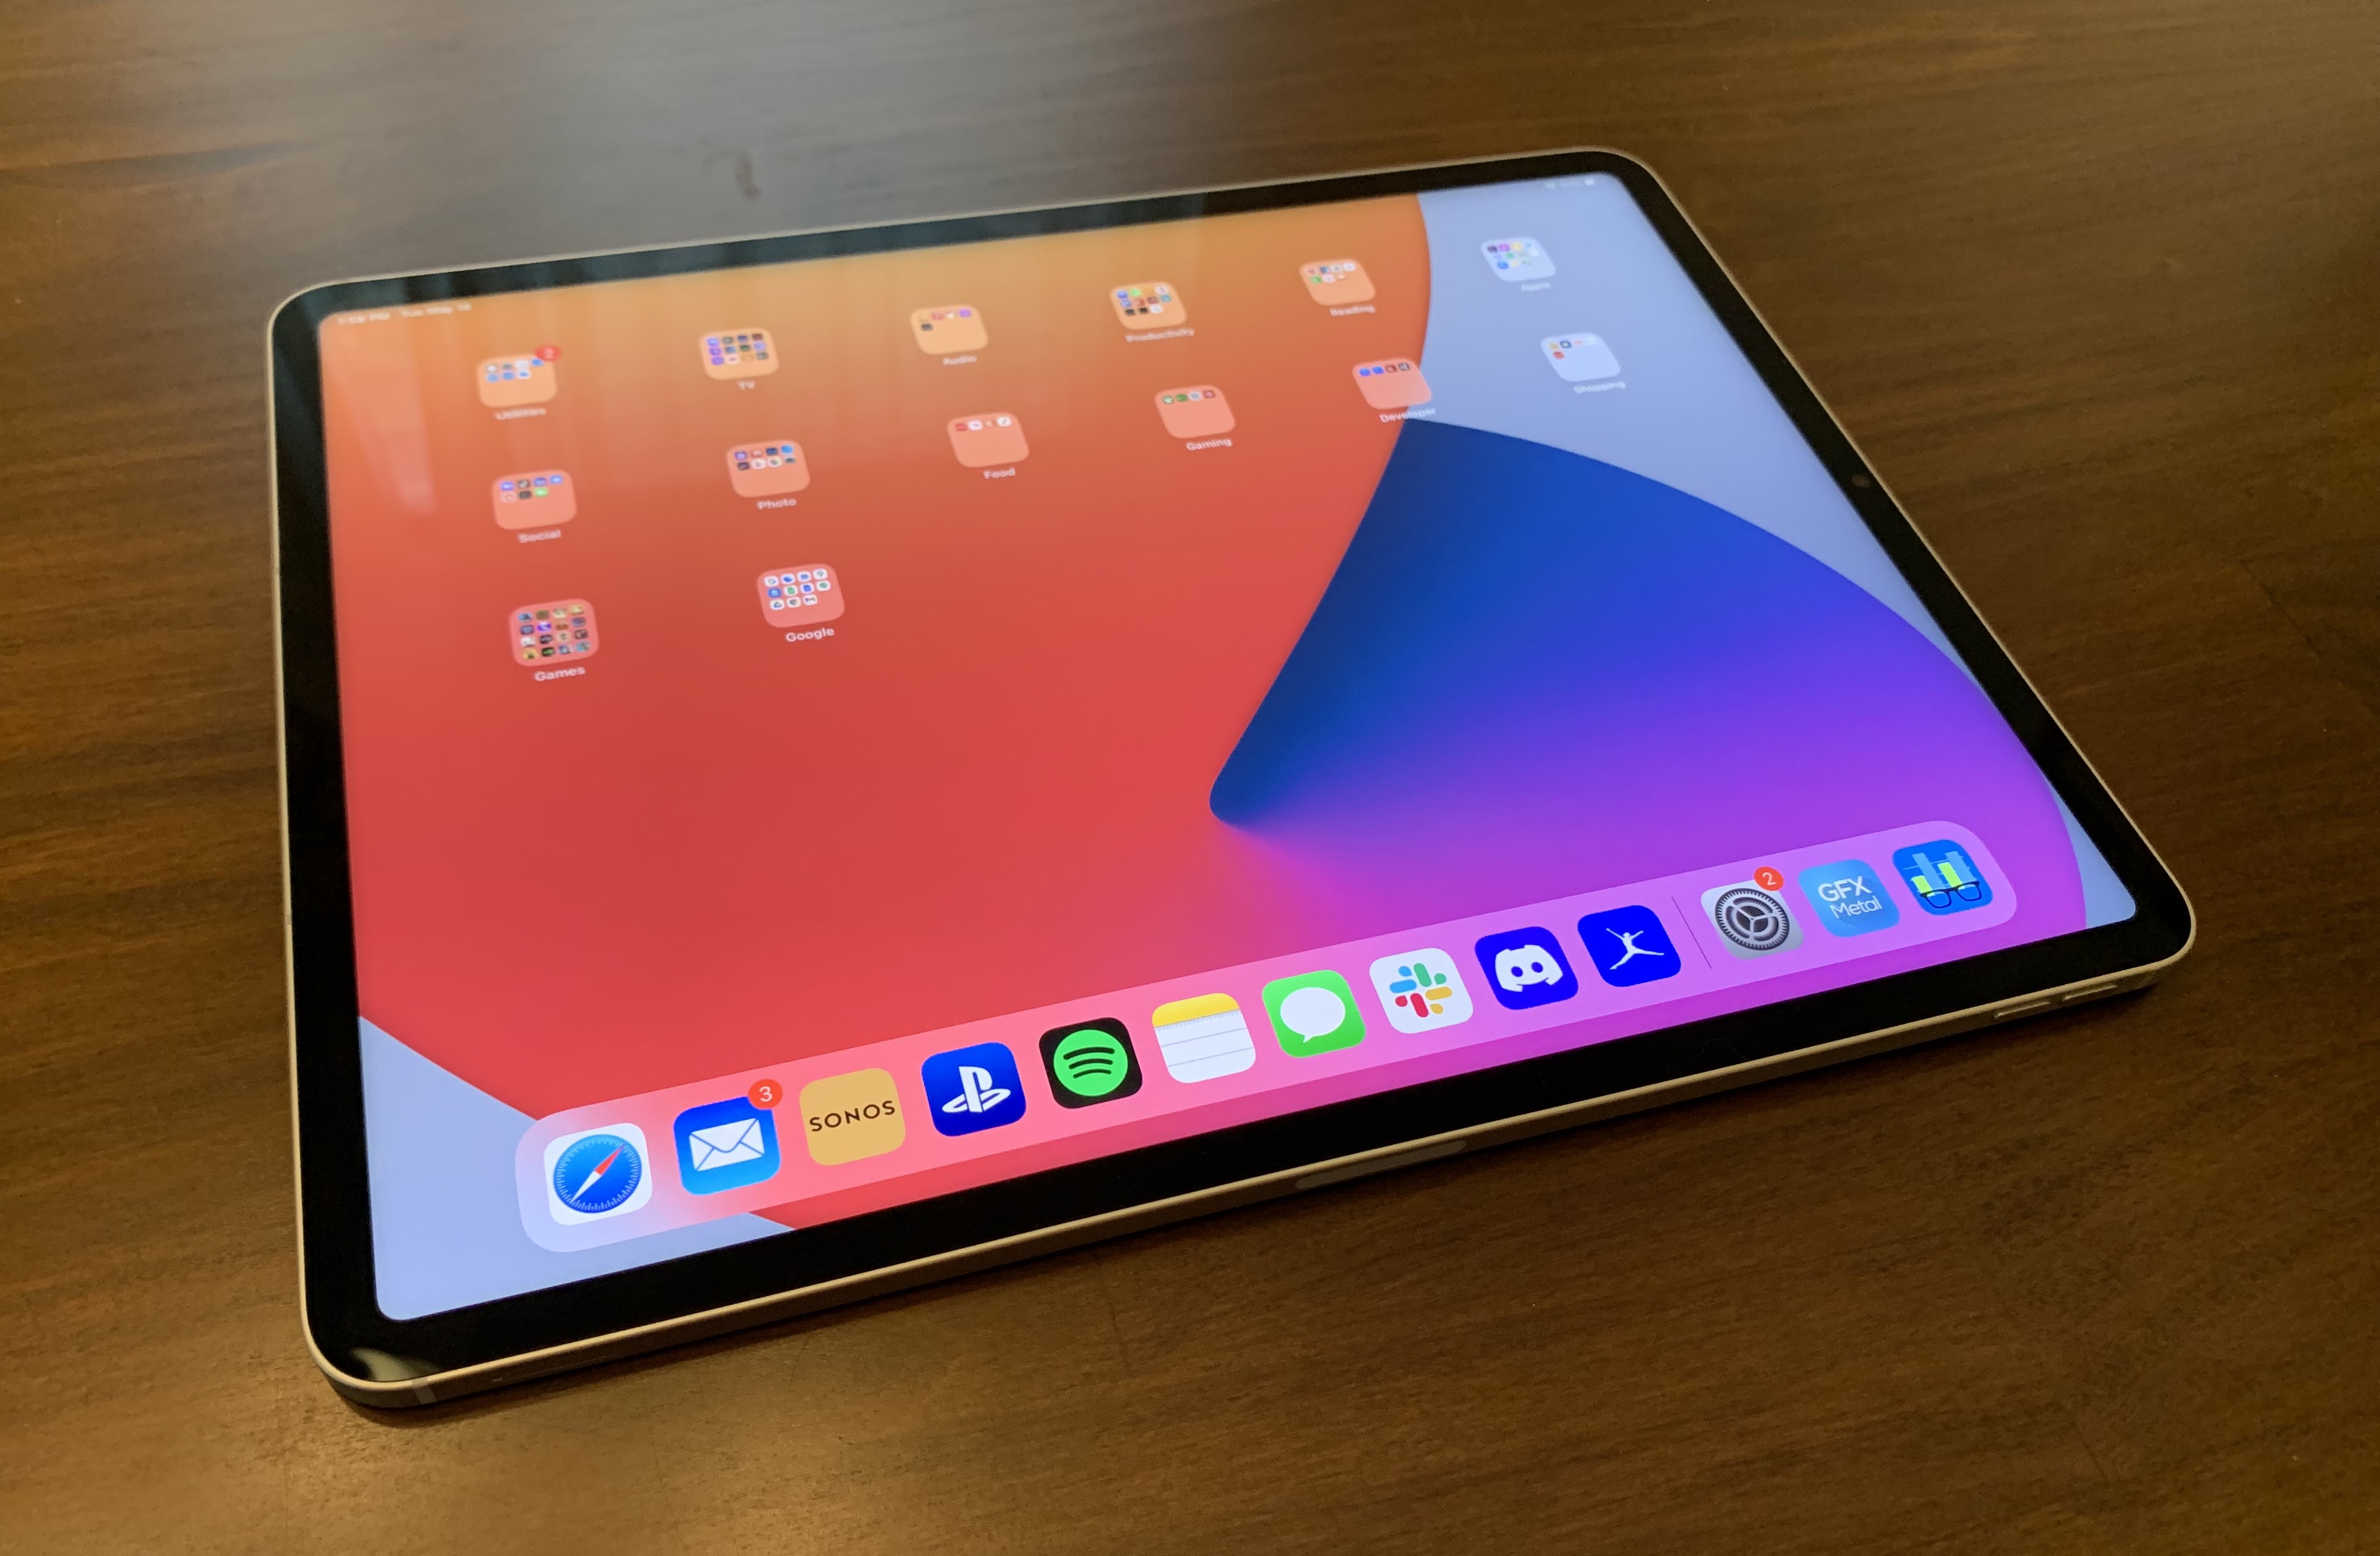 2021 iPad Pro review: More of the same—but way, way faster thanks